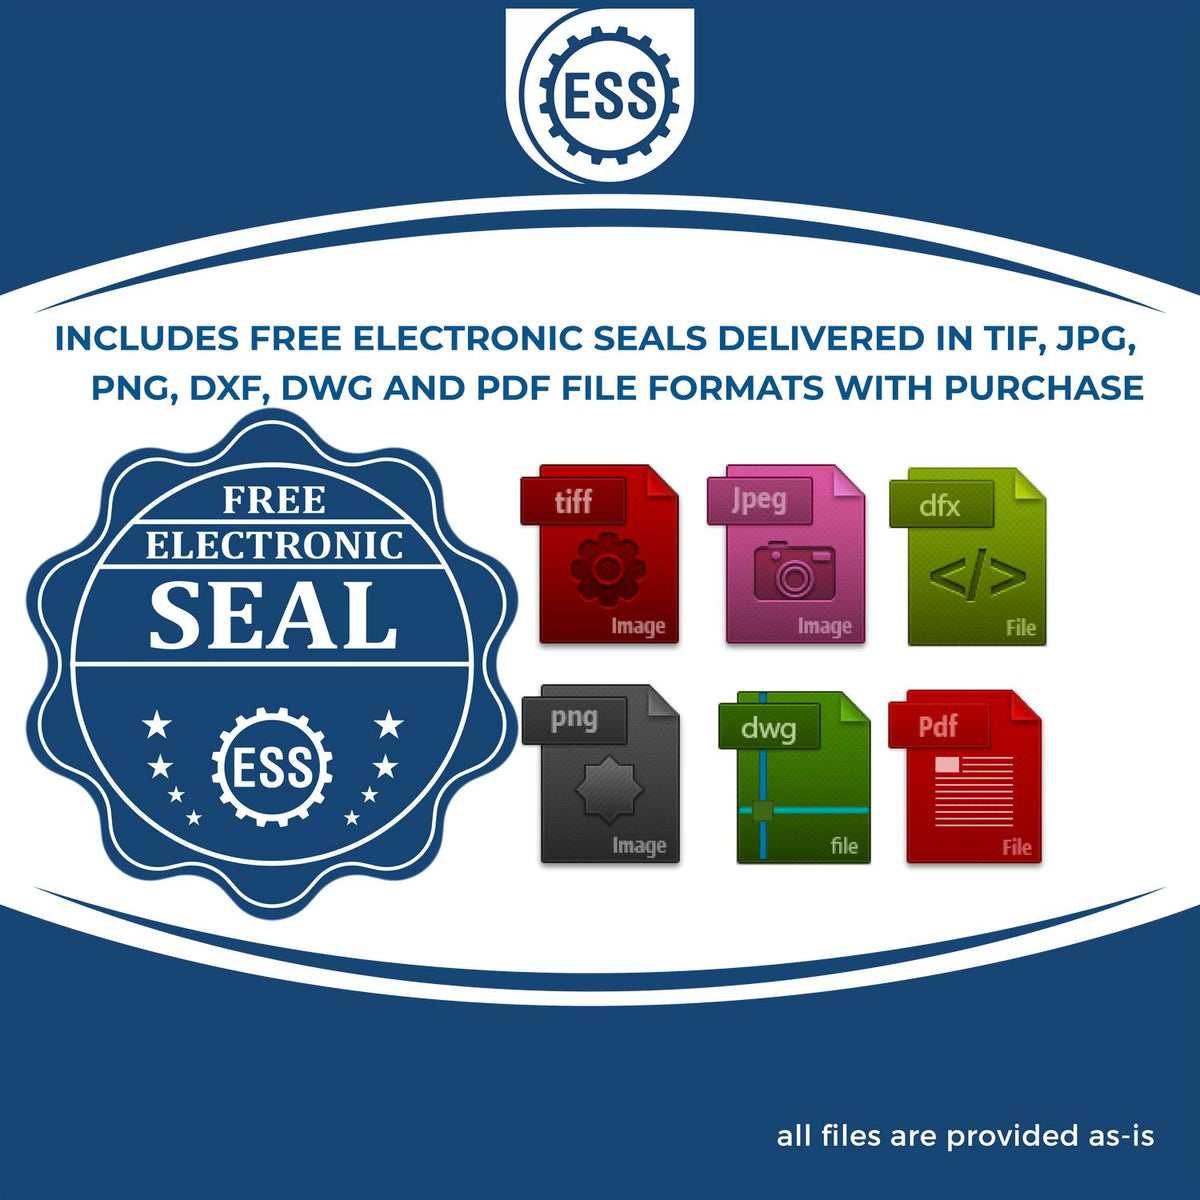 An infographic for the free electronic seal for the MaxLight Premium Pre-Inked West Virginia State Seal Notarial Stamp illustrating the different file type icons such as DXF, DWG, TIF, JPG and PNG.